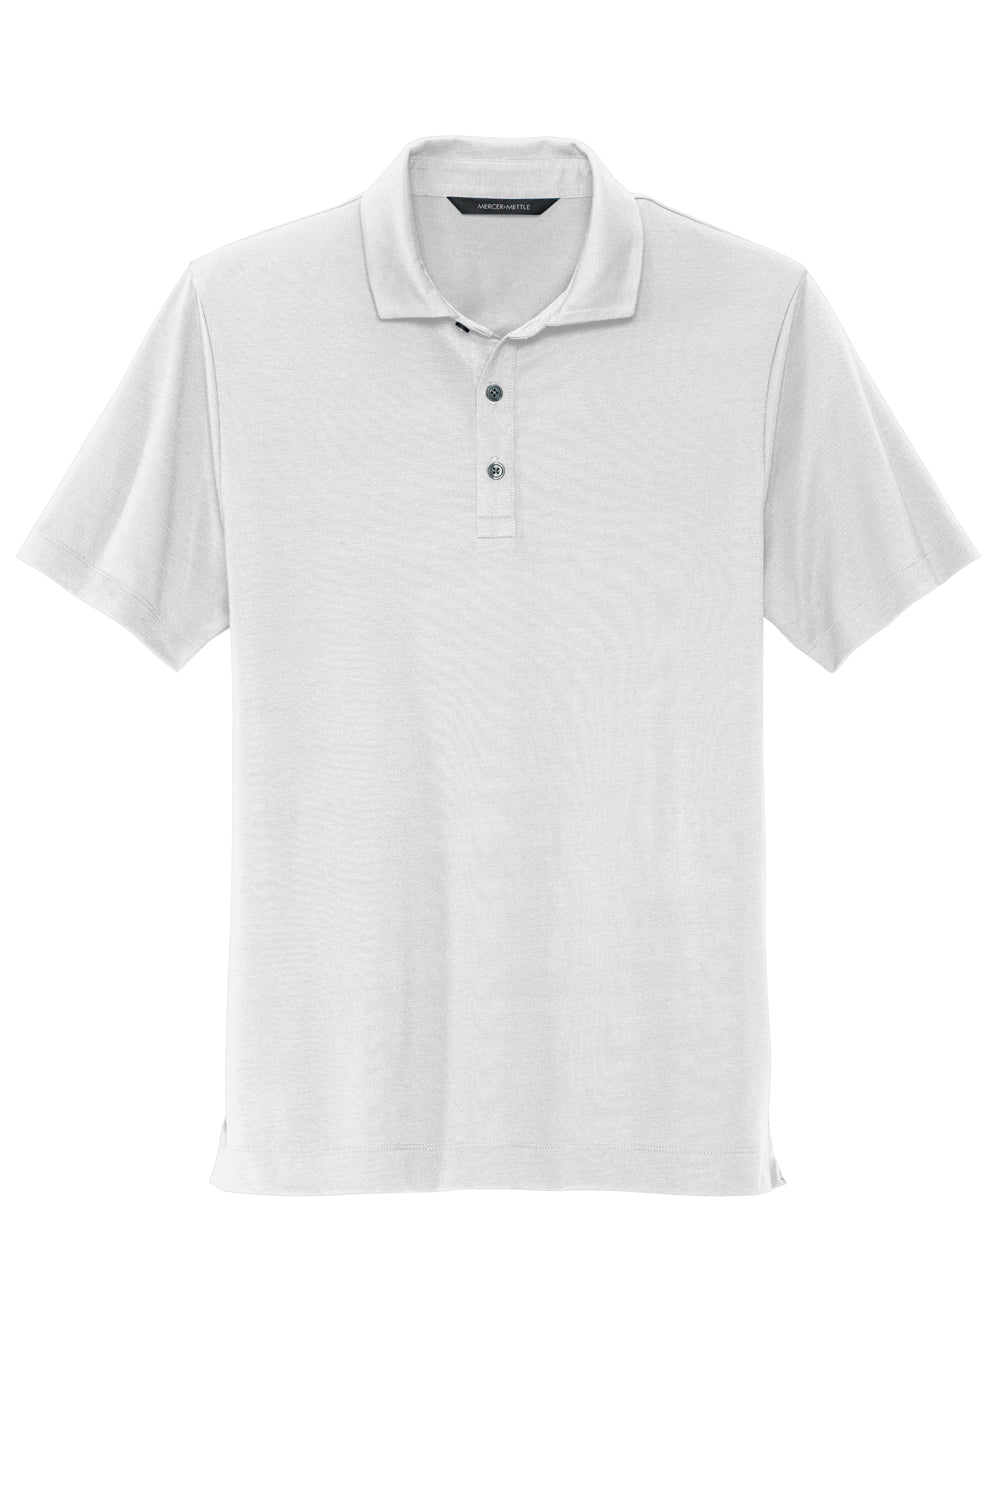 Mercer+Mettle MM1014 Stretch Jersey Short Sleeve Polo Shirt White Flat Front